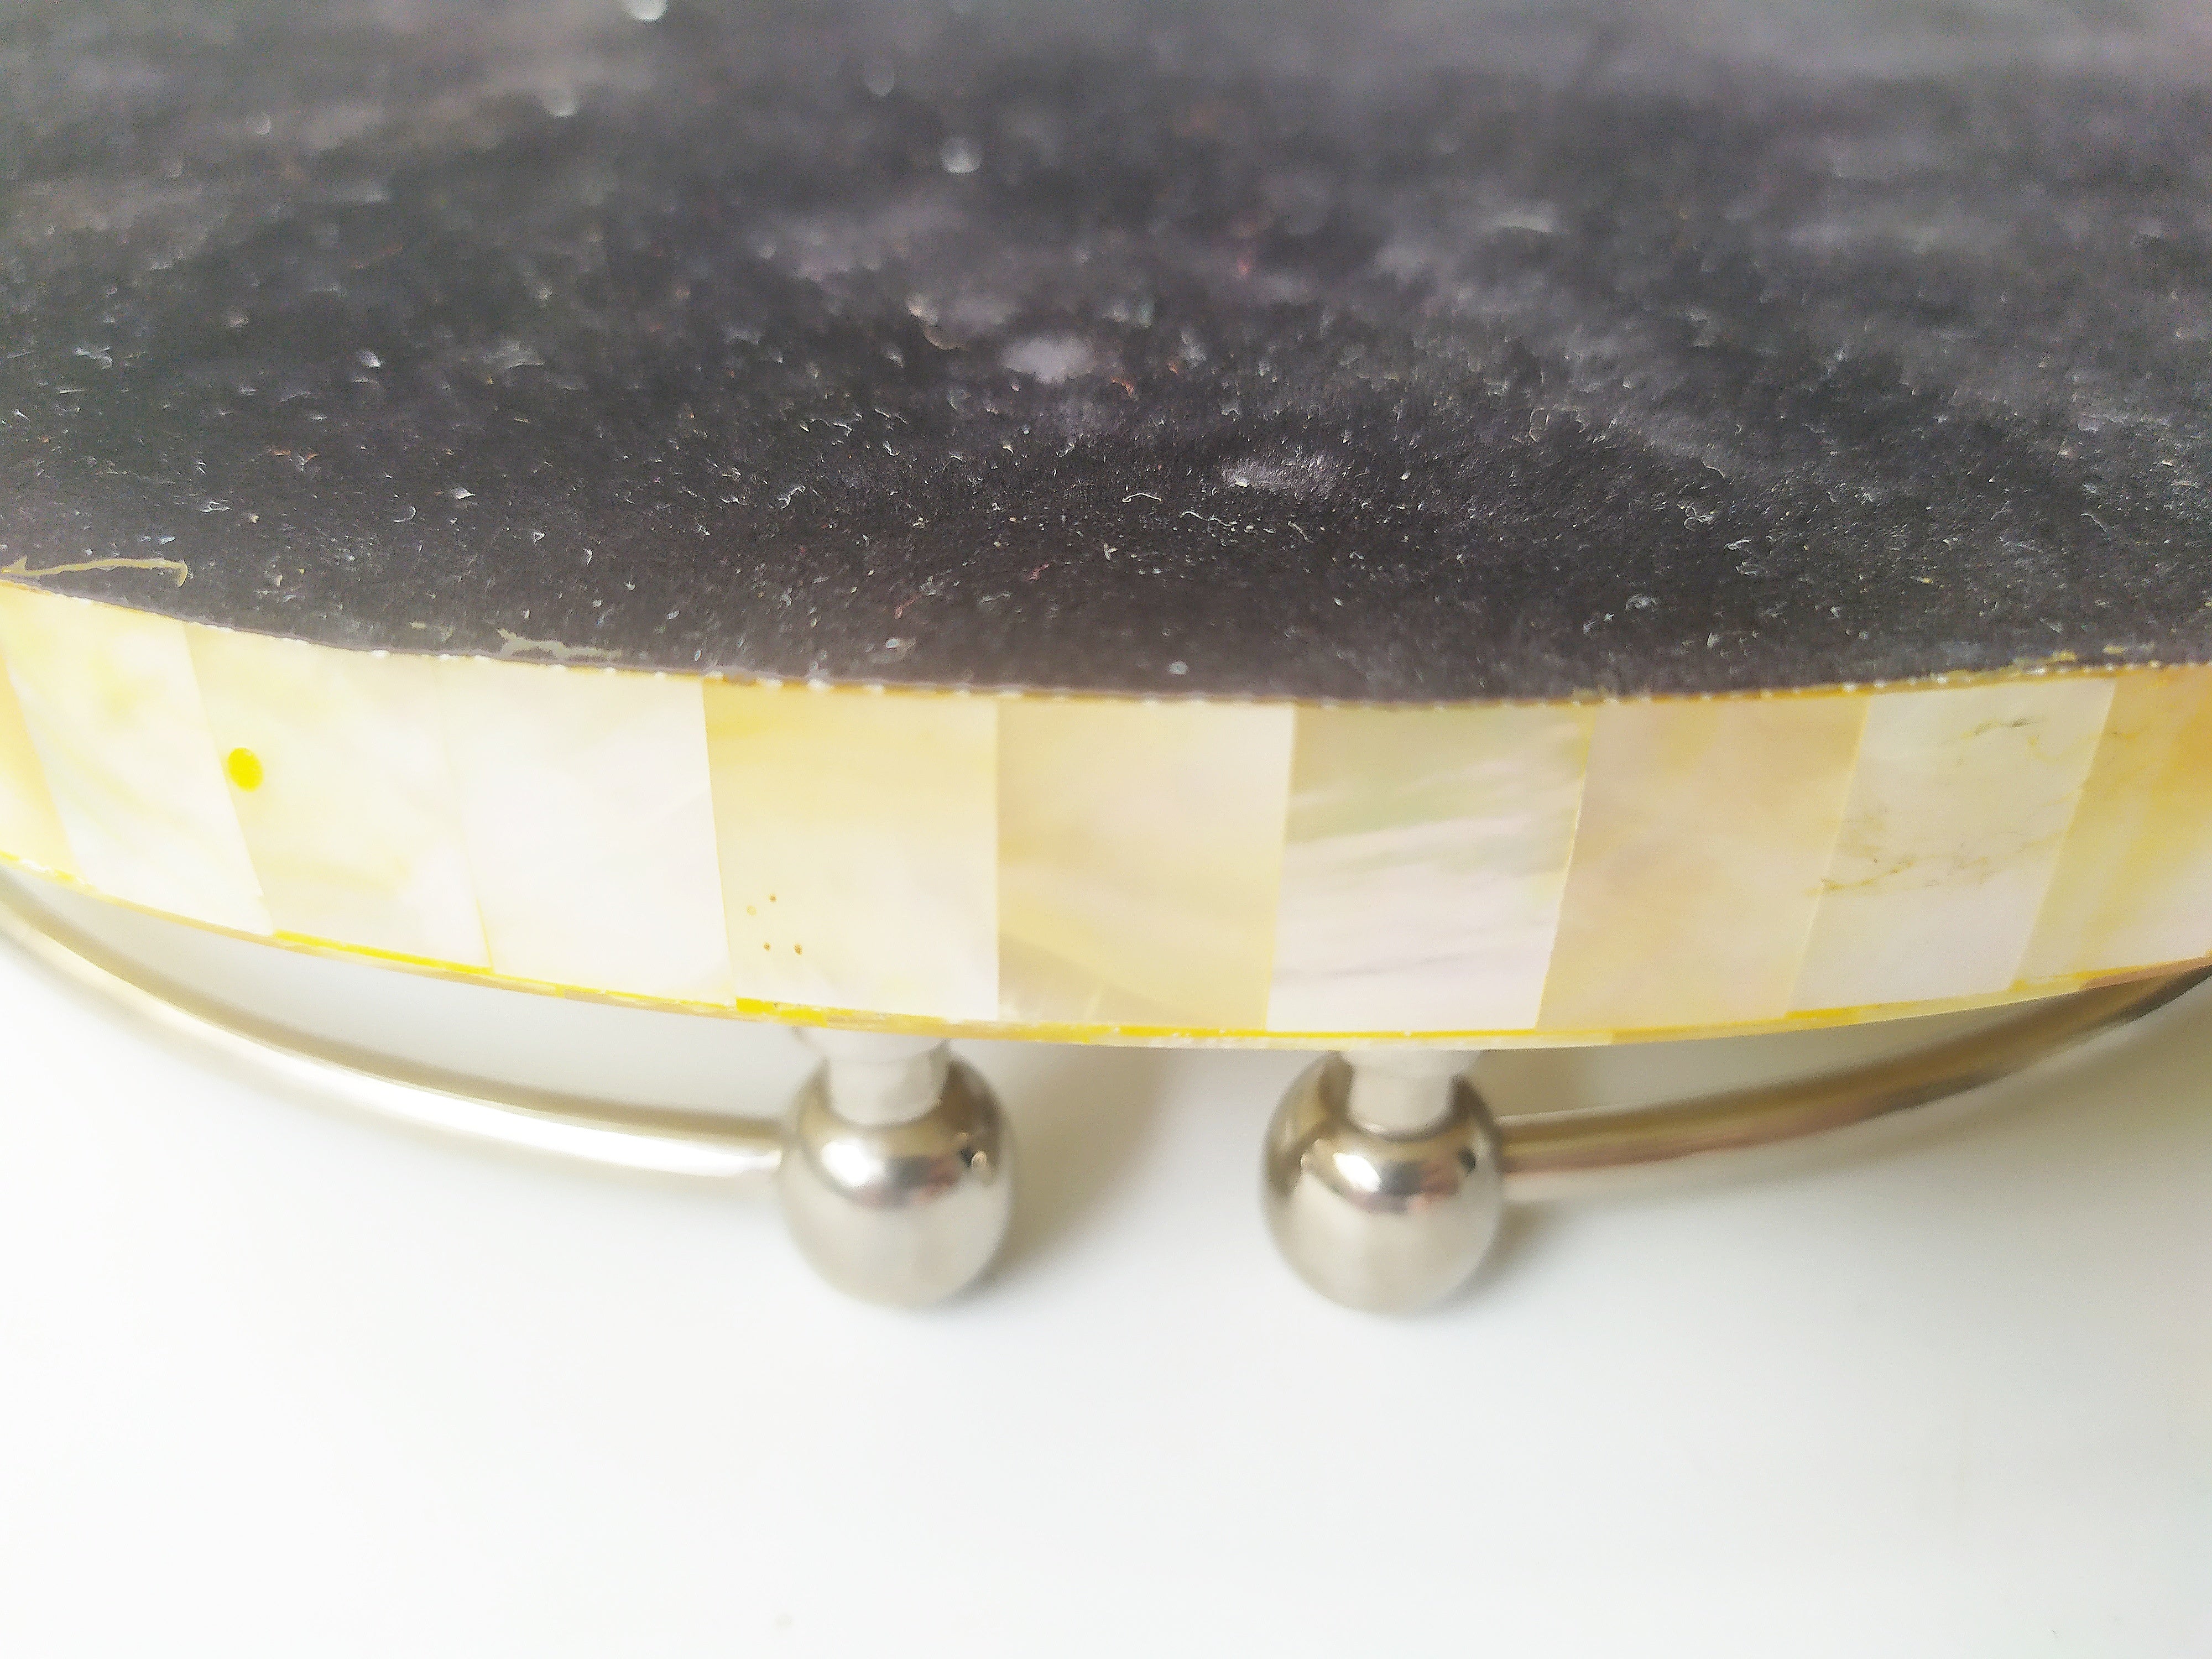 Mother of Pearl Round Decorative Tray - Pearl Yellow Tray with Brass Handles